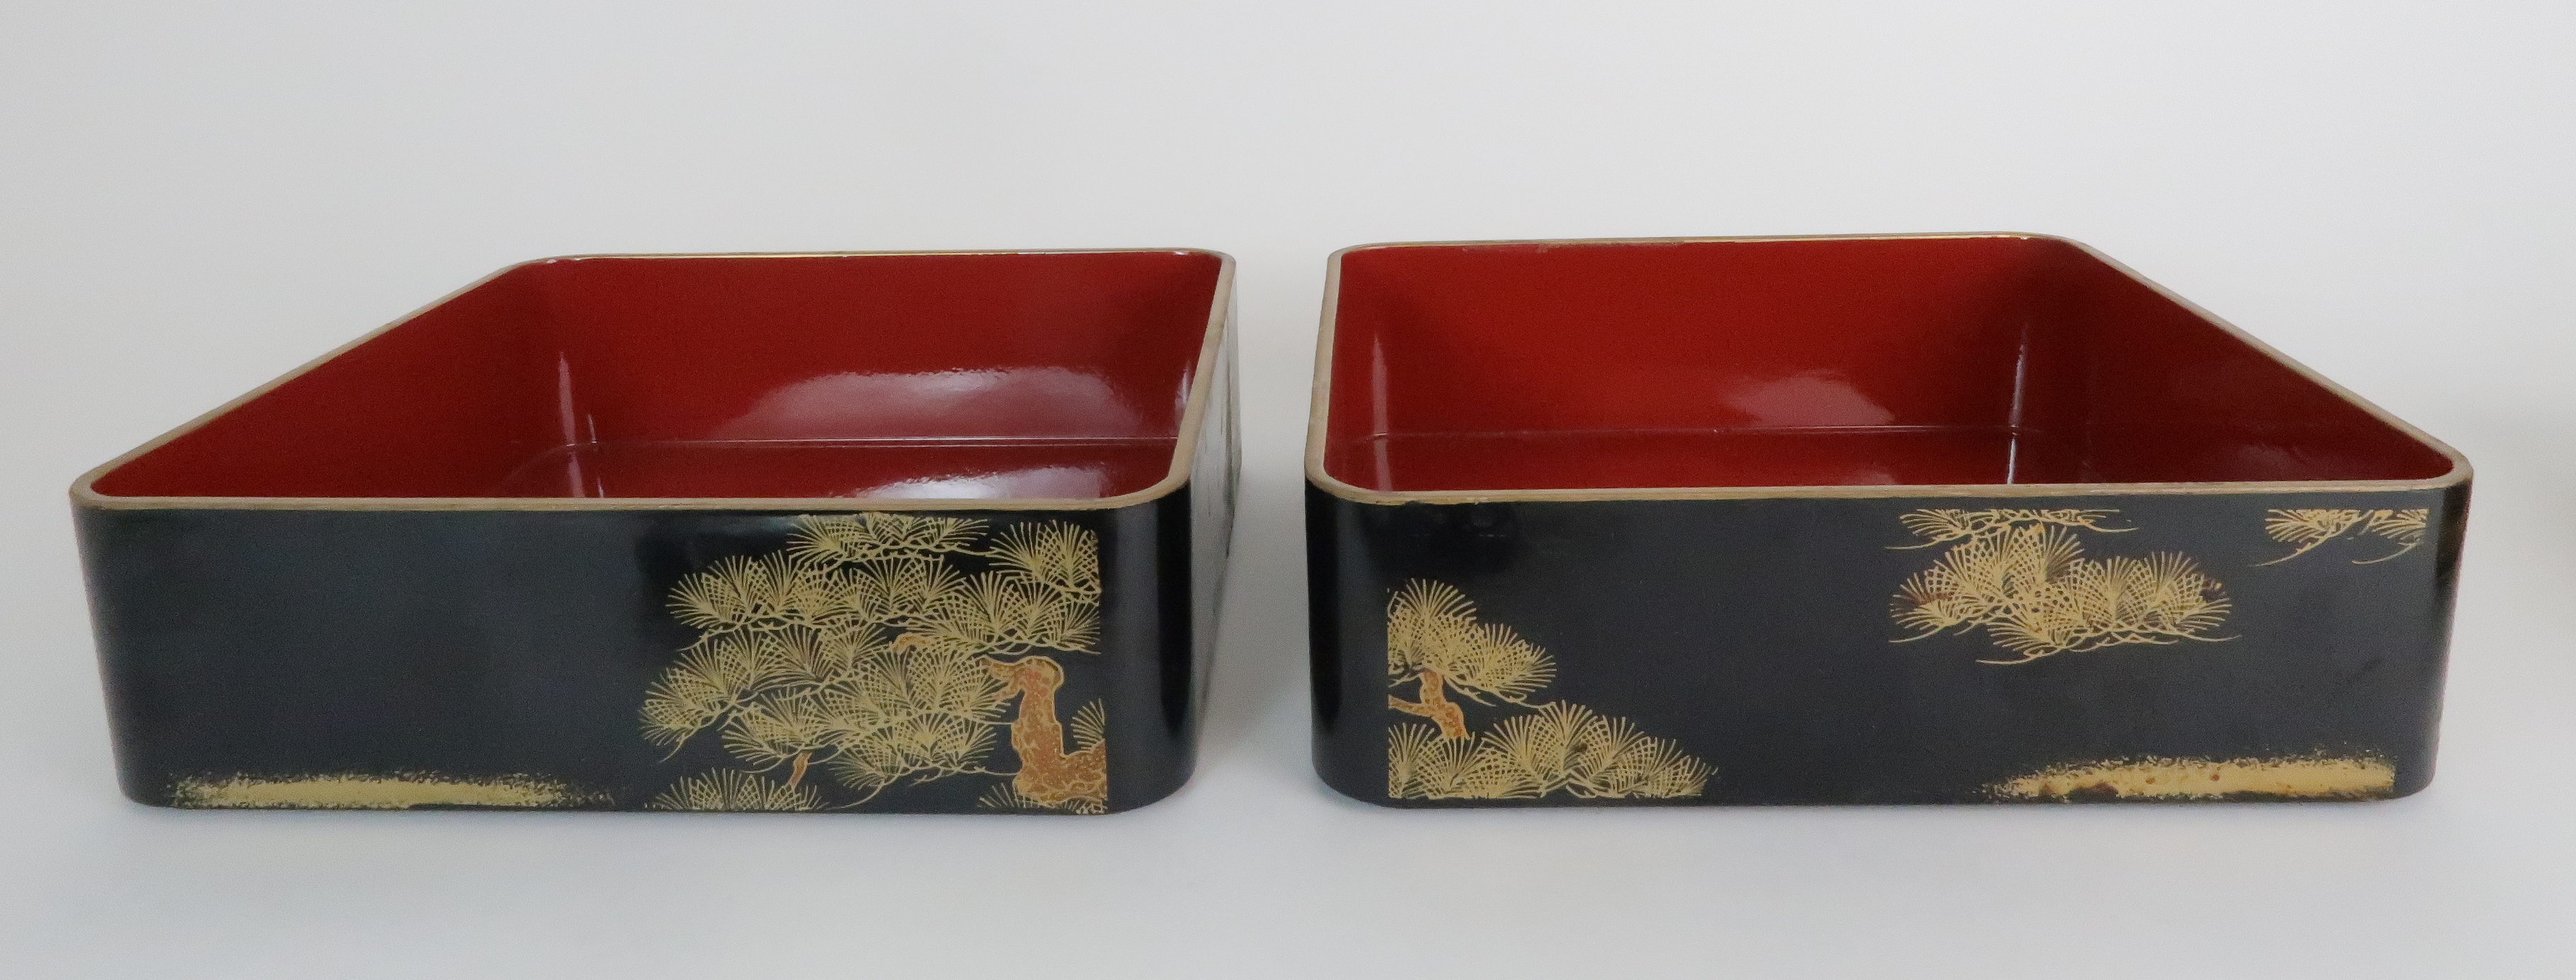 A JAPANESE LACQUERED BOX with two sections, painted with two storks amongst pine trees, 15cm high, - Image 4 of 7